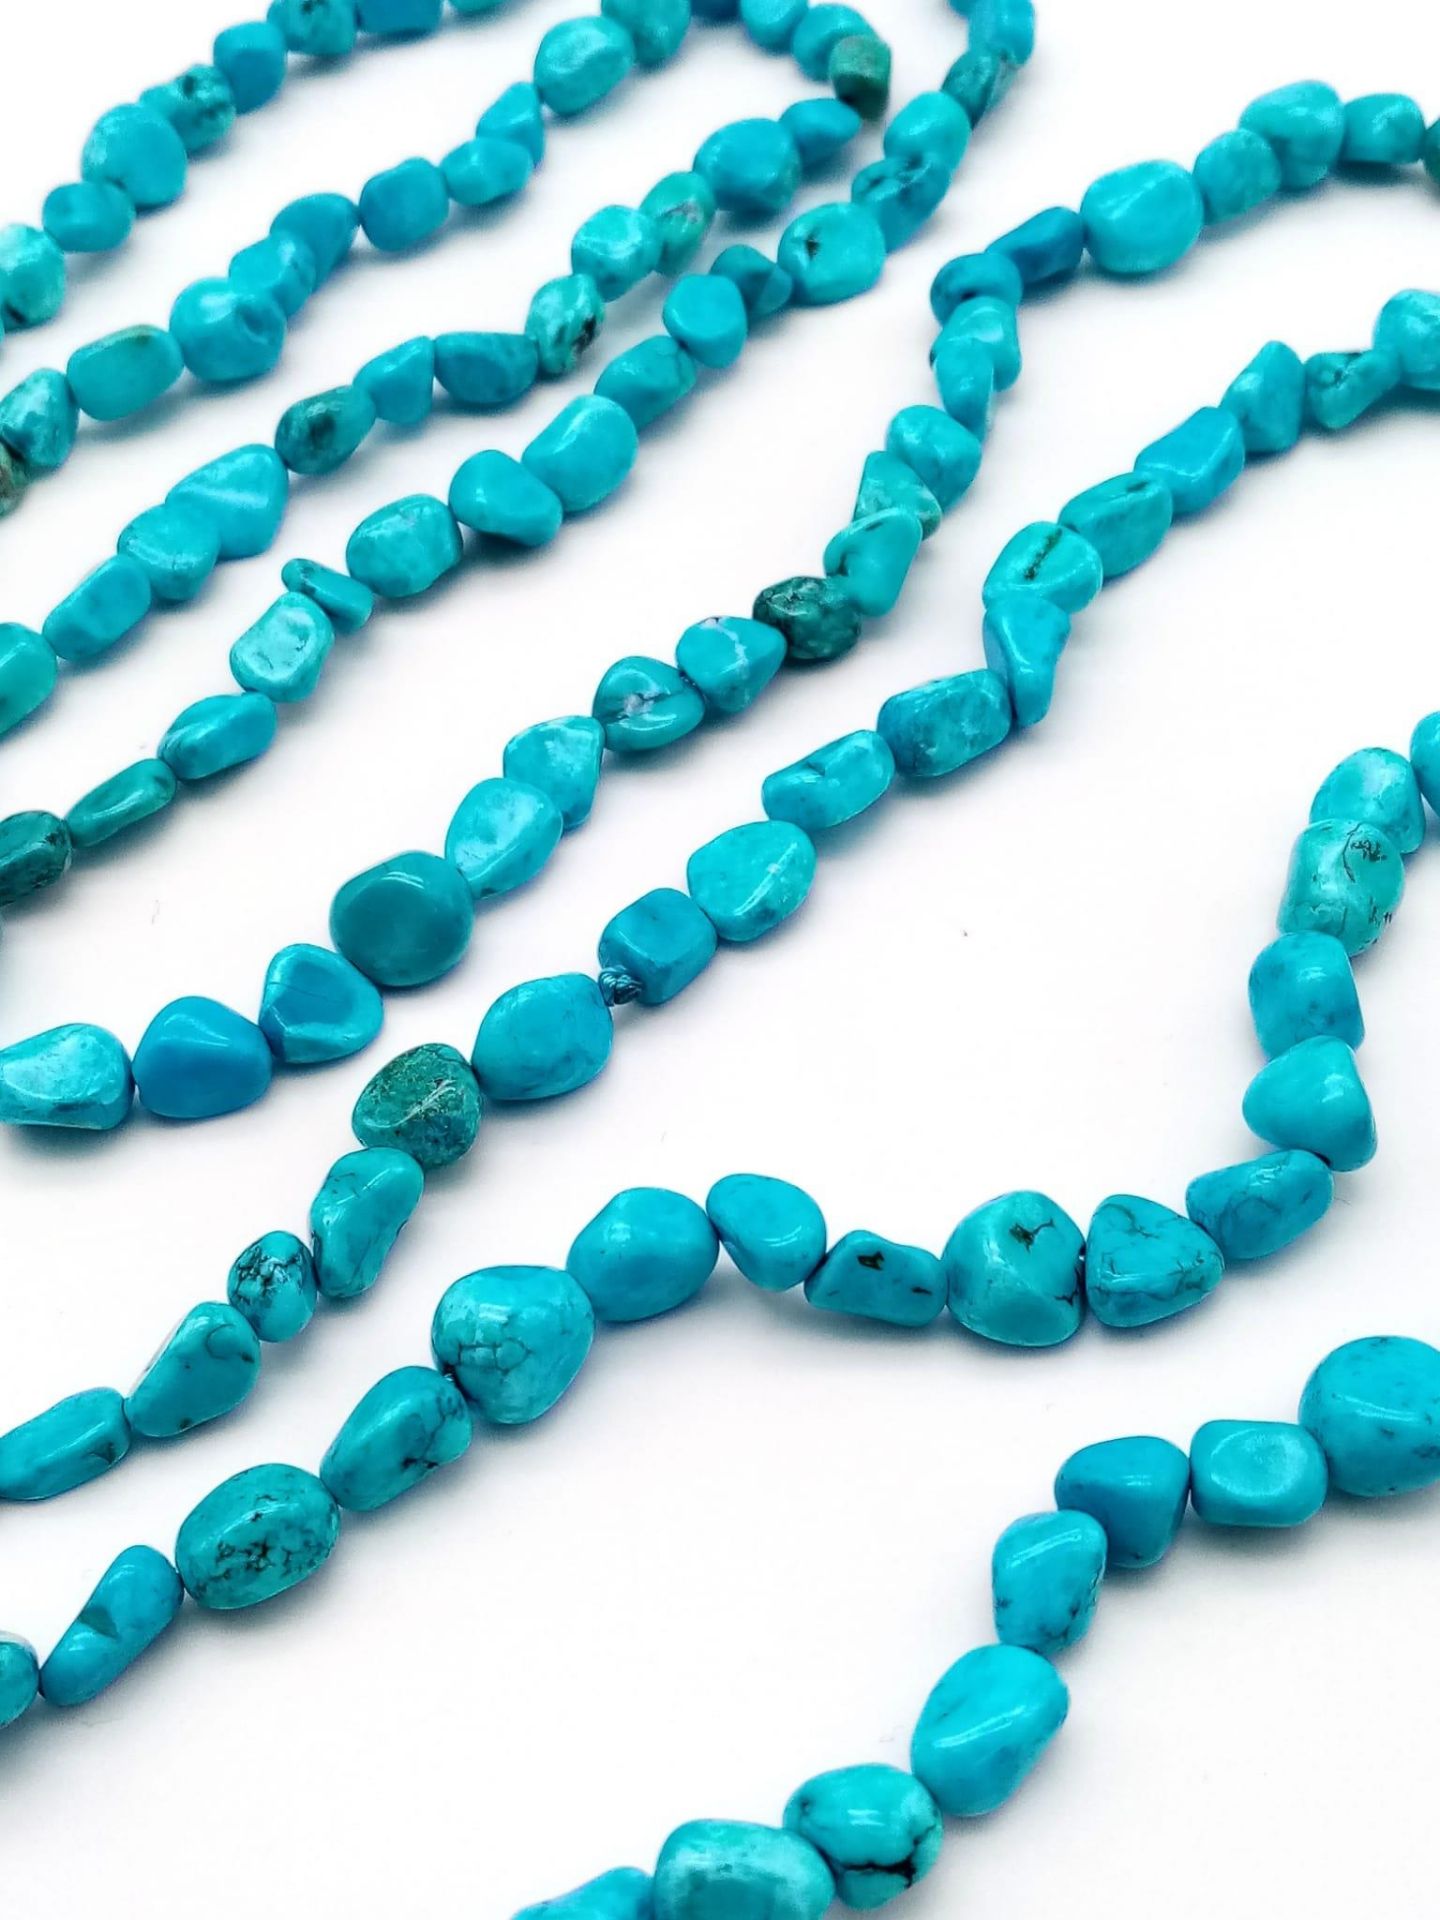 Two Natural Rough Gemstone Rope Length Necklaces. Lapis Lazuli and Turquoise. Both 150cm. - Image 6 of 6